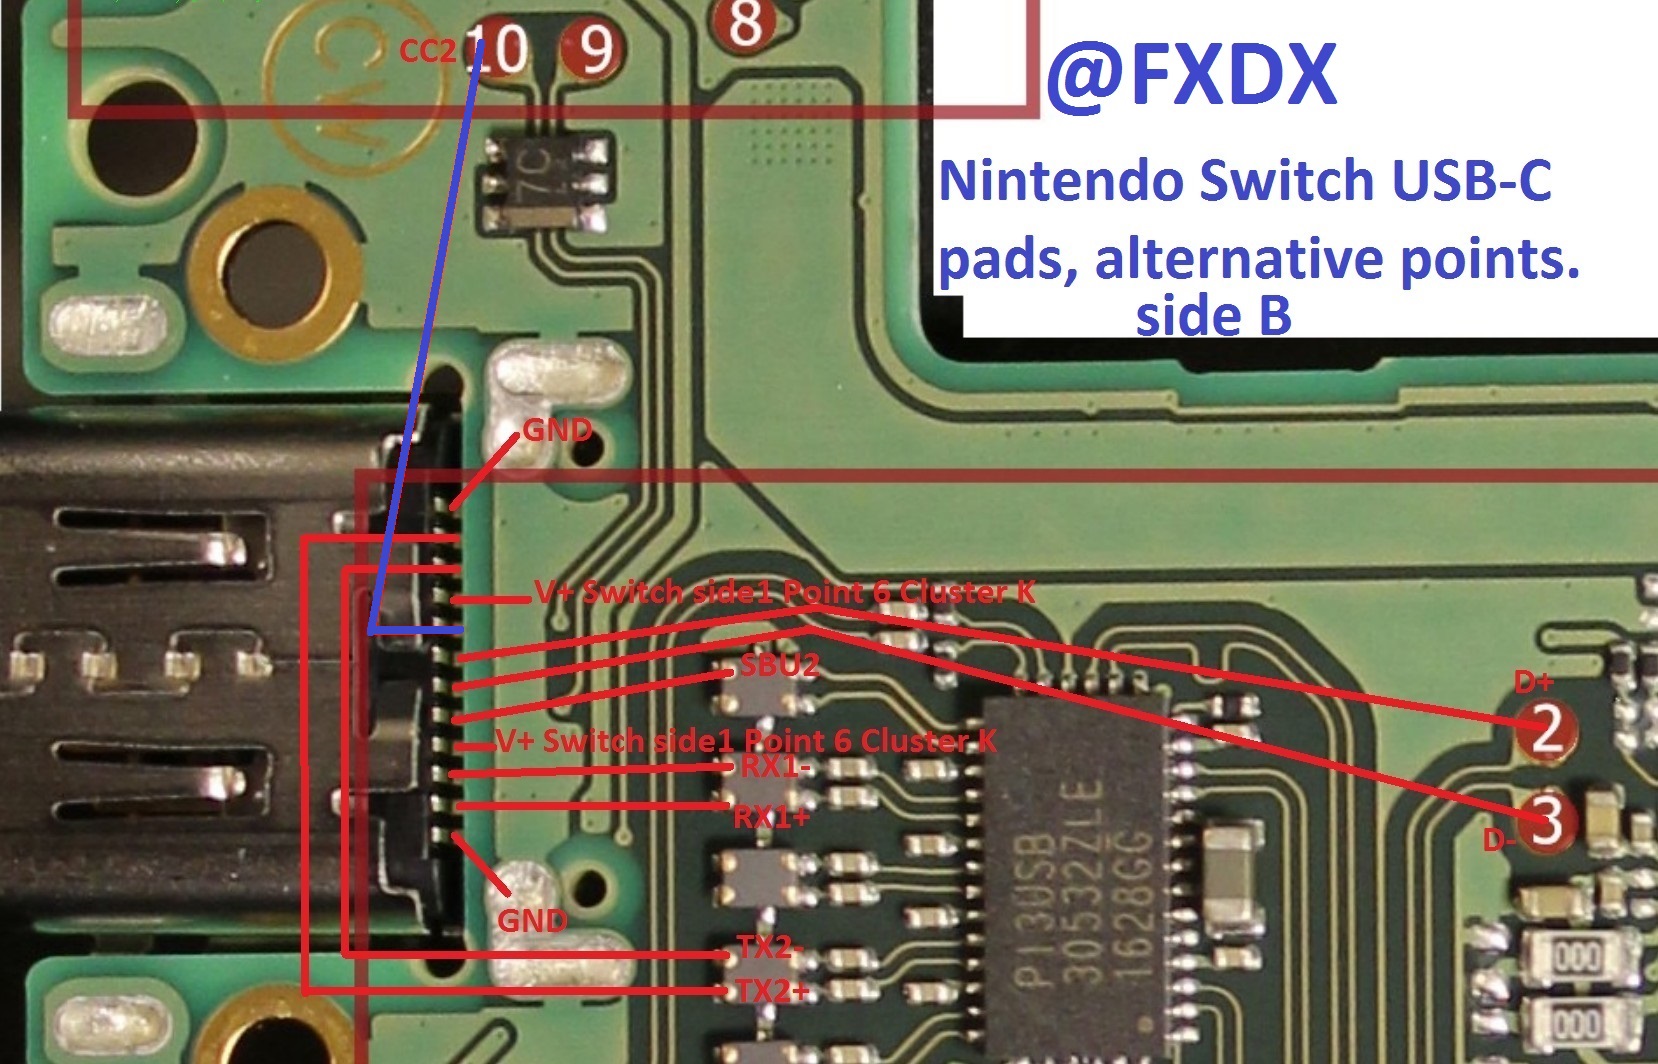 Nintendo Switch, repairing damaged or lifted pads on USB-C port